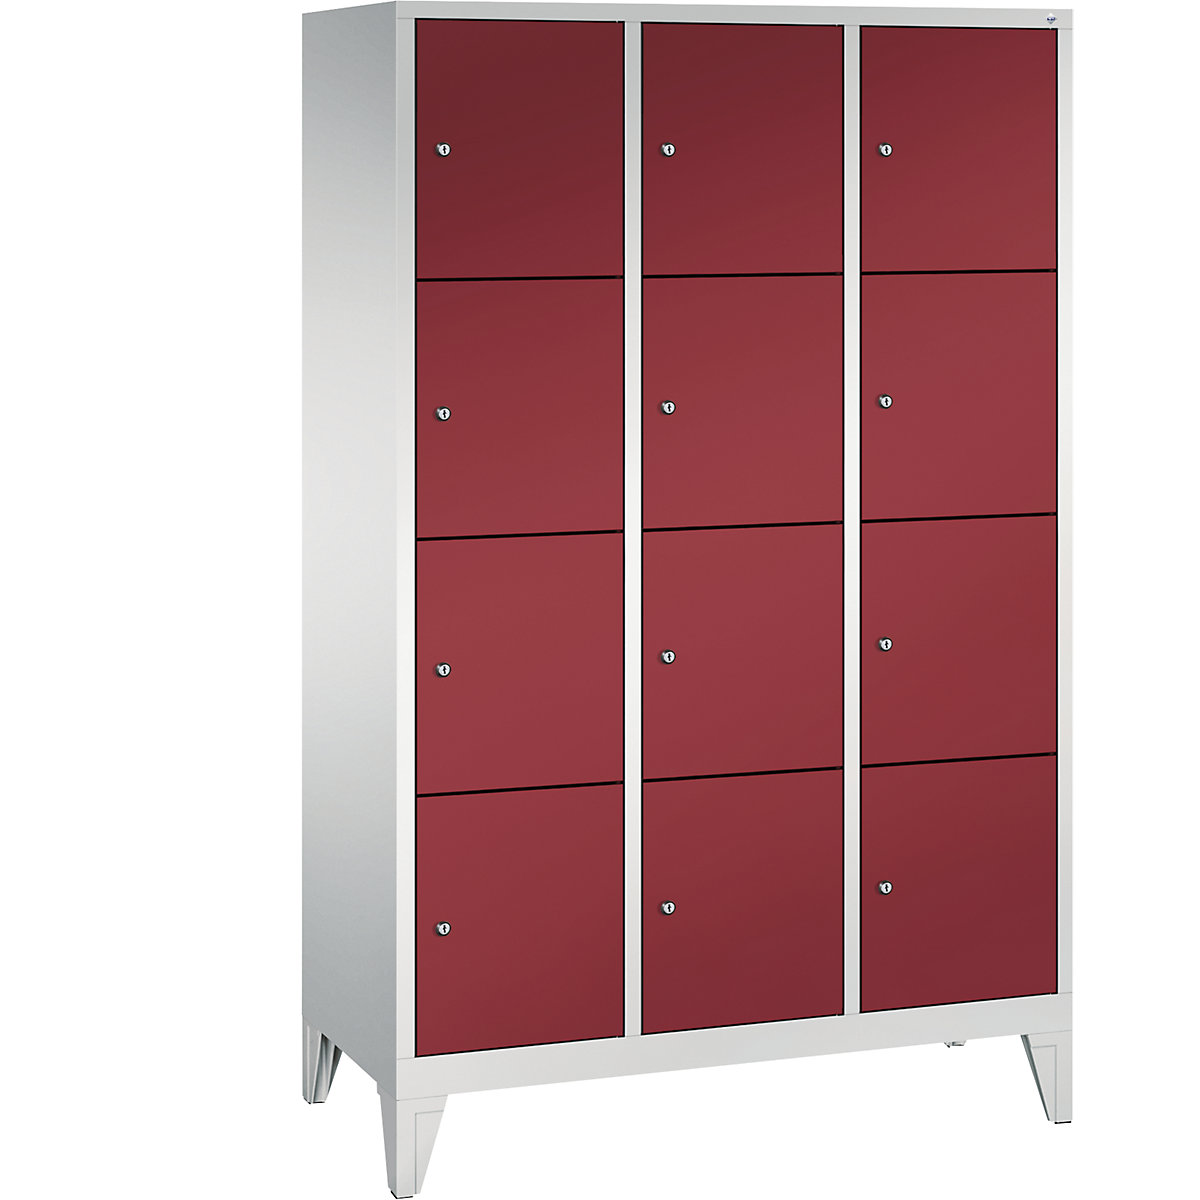 CLASSIC locker unit with feet – C+P, 3 compartments, 4 shelf compartments each, compartment width 400 mm, light grey / ruby red-10